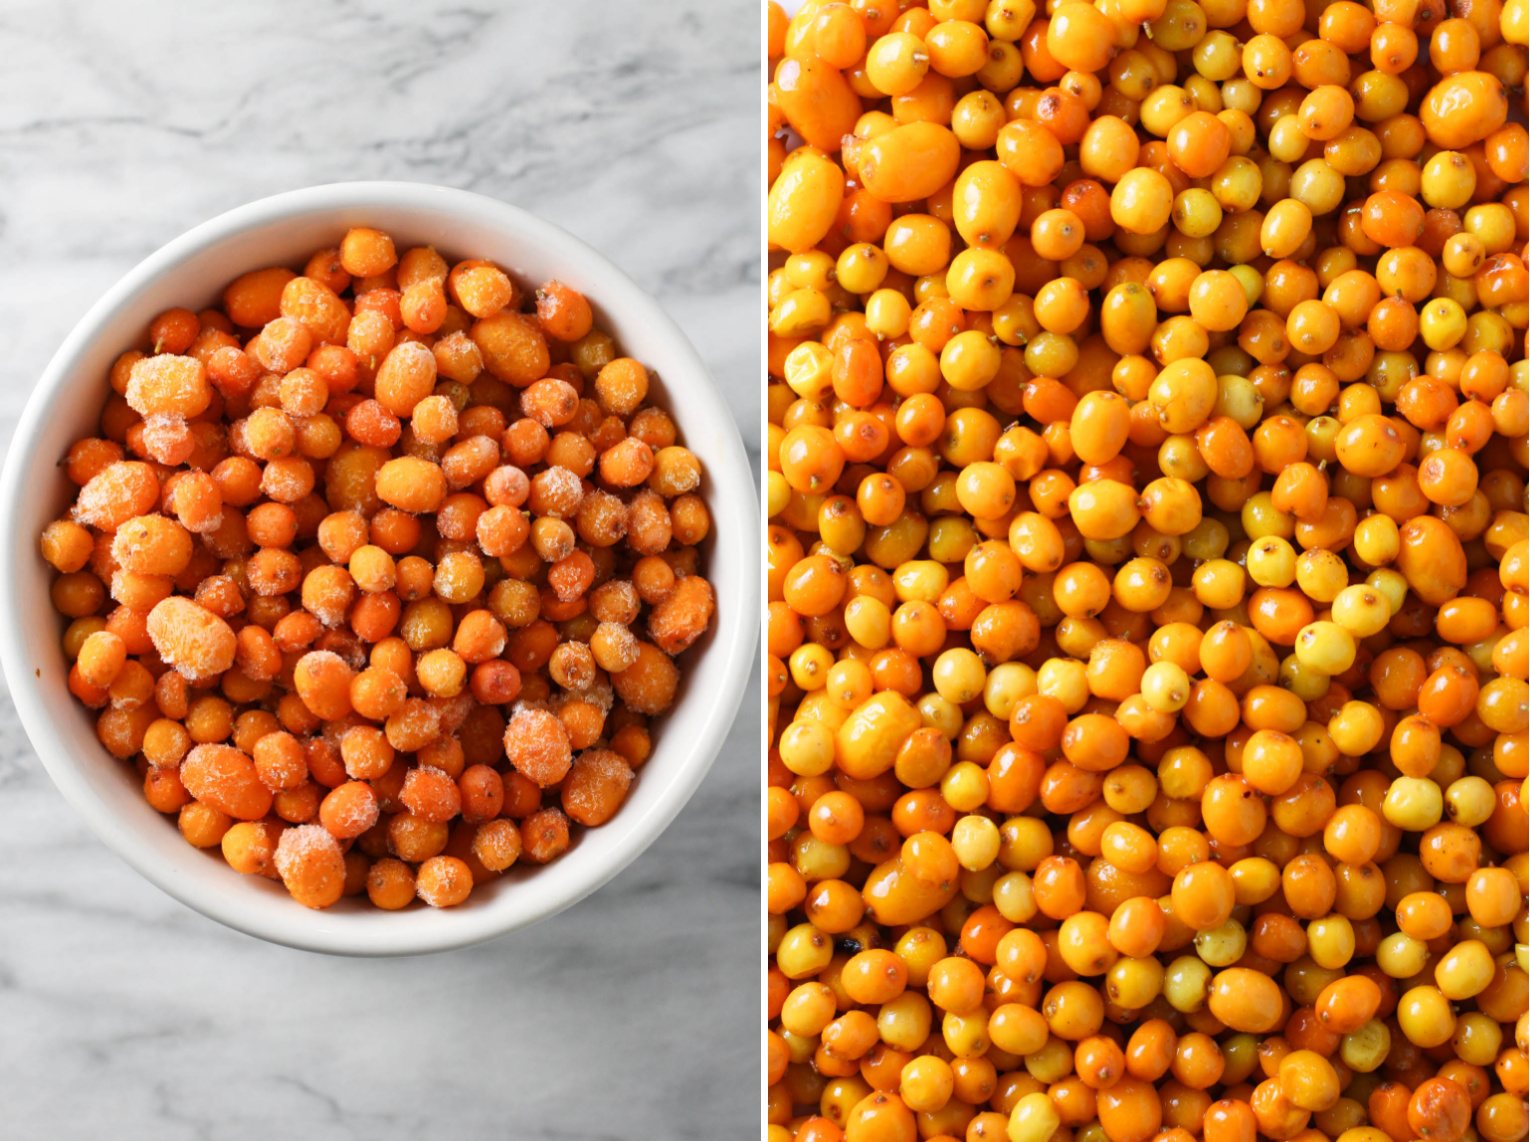 Two images side-by-side. On the left image, there is a bowl with frozen sea buckthorm berries. On the right image, a close up shot of sea buckthorn berries.